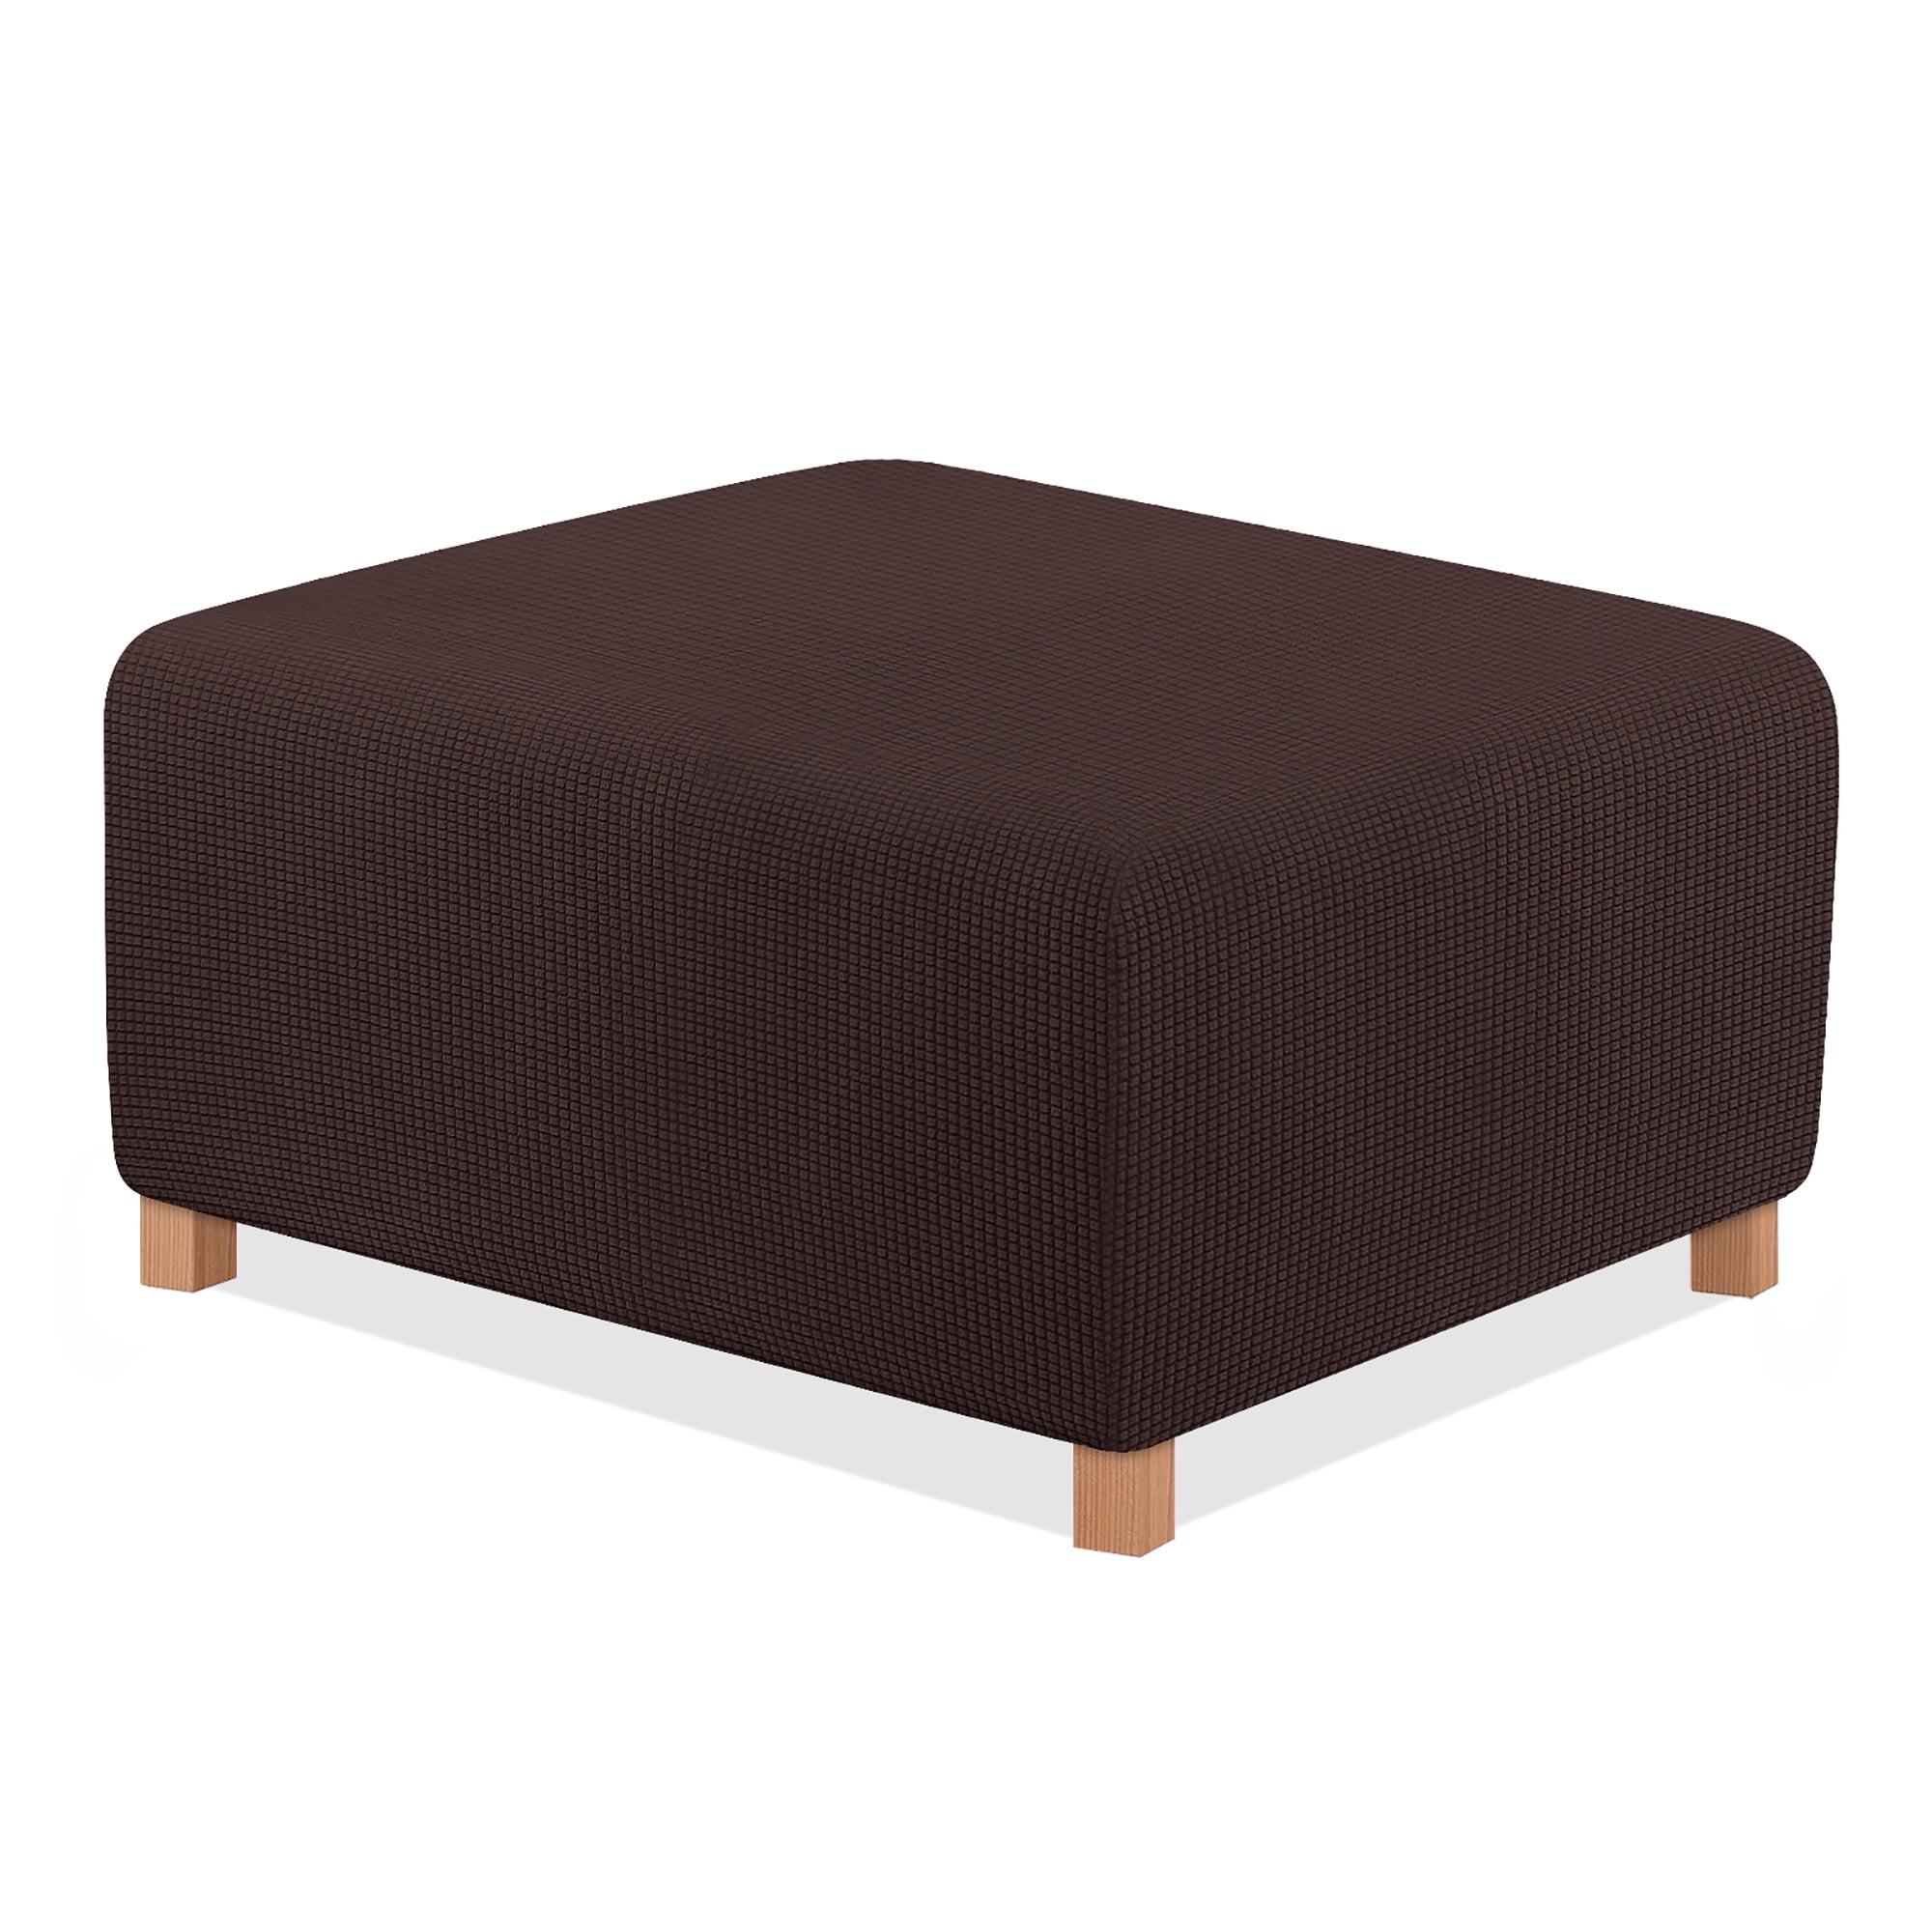 1x Solid Stretch Ottoman Slipcover Sofa Footstool Cover Storage Protector 